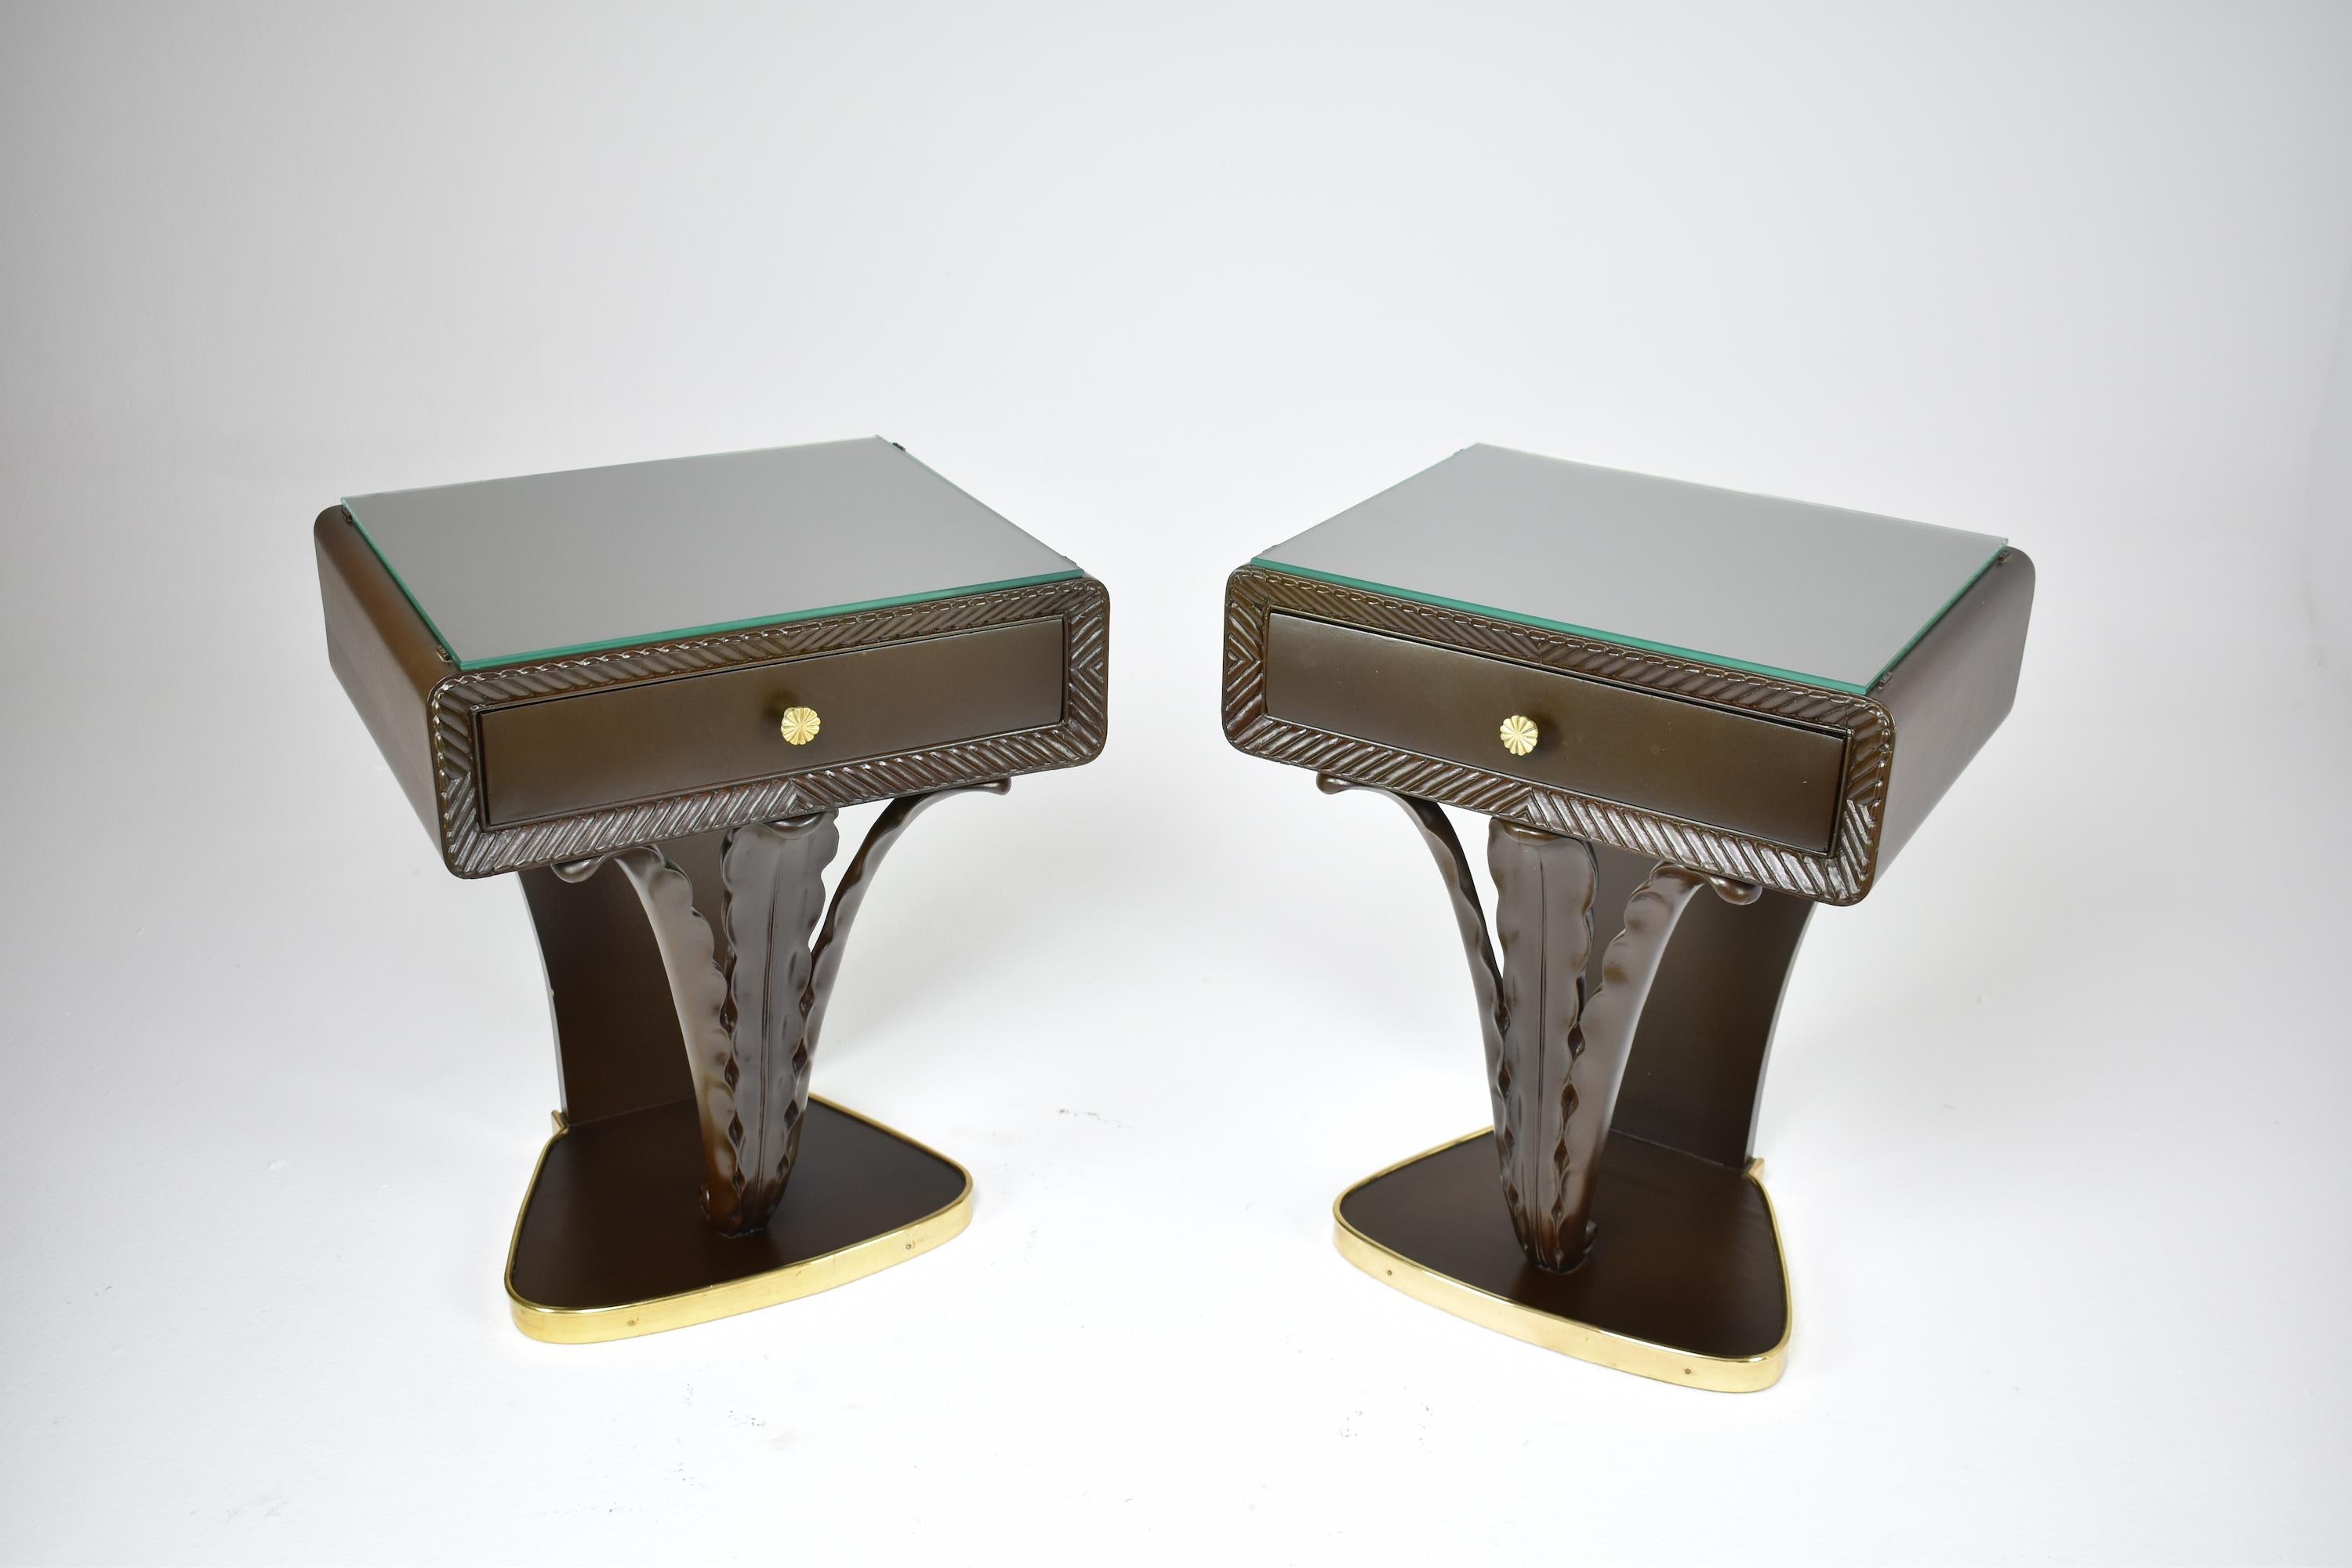 A very stylish pair of Italian mid-century nightstands crafted out of dark solid wood and beautified by a brass rim on the base, meticulously sculpted details and a clear glass tabletop. 
These 20th-century vintage side tables have a distinctive